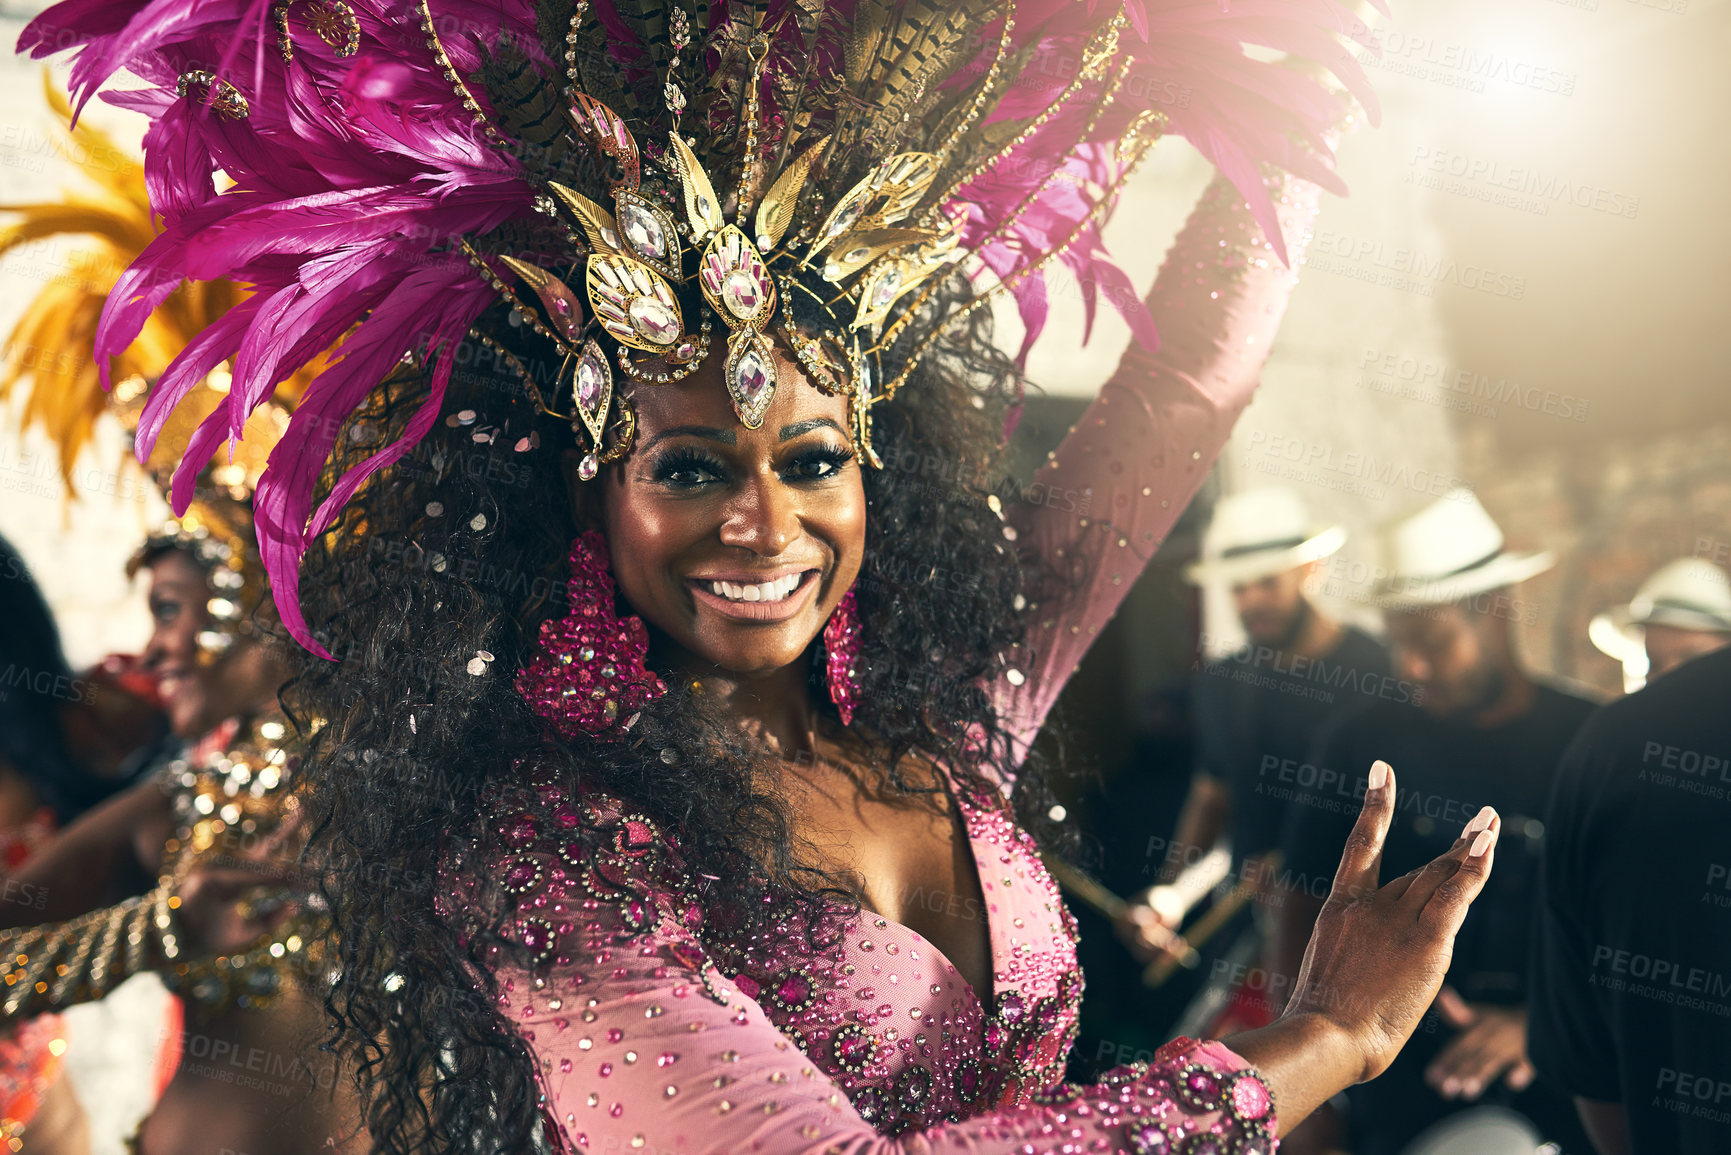 Buy stock photo Party, dancing and portrait of samba dancer at carnival, festival and traditional celebration in Brazil. Culture, costume and face of black woman ready for dance, performance and music with band